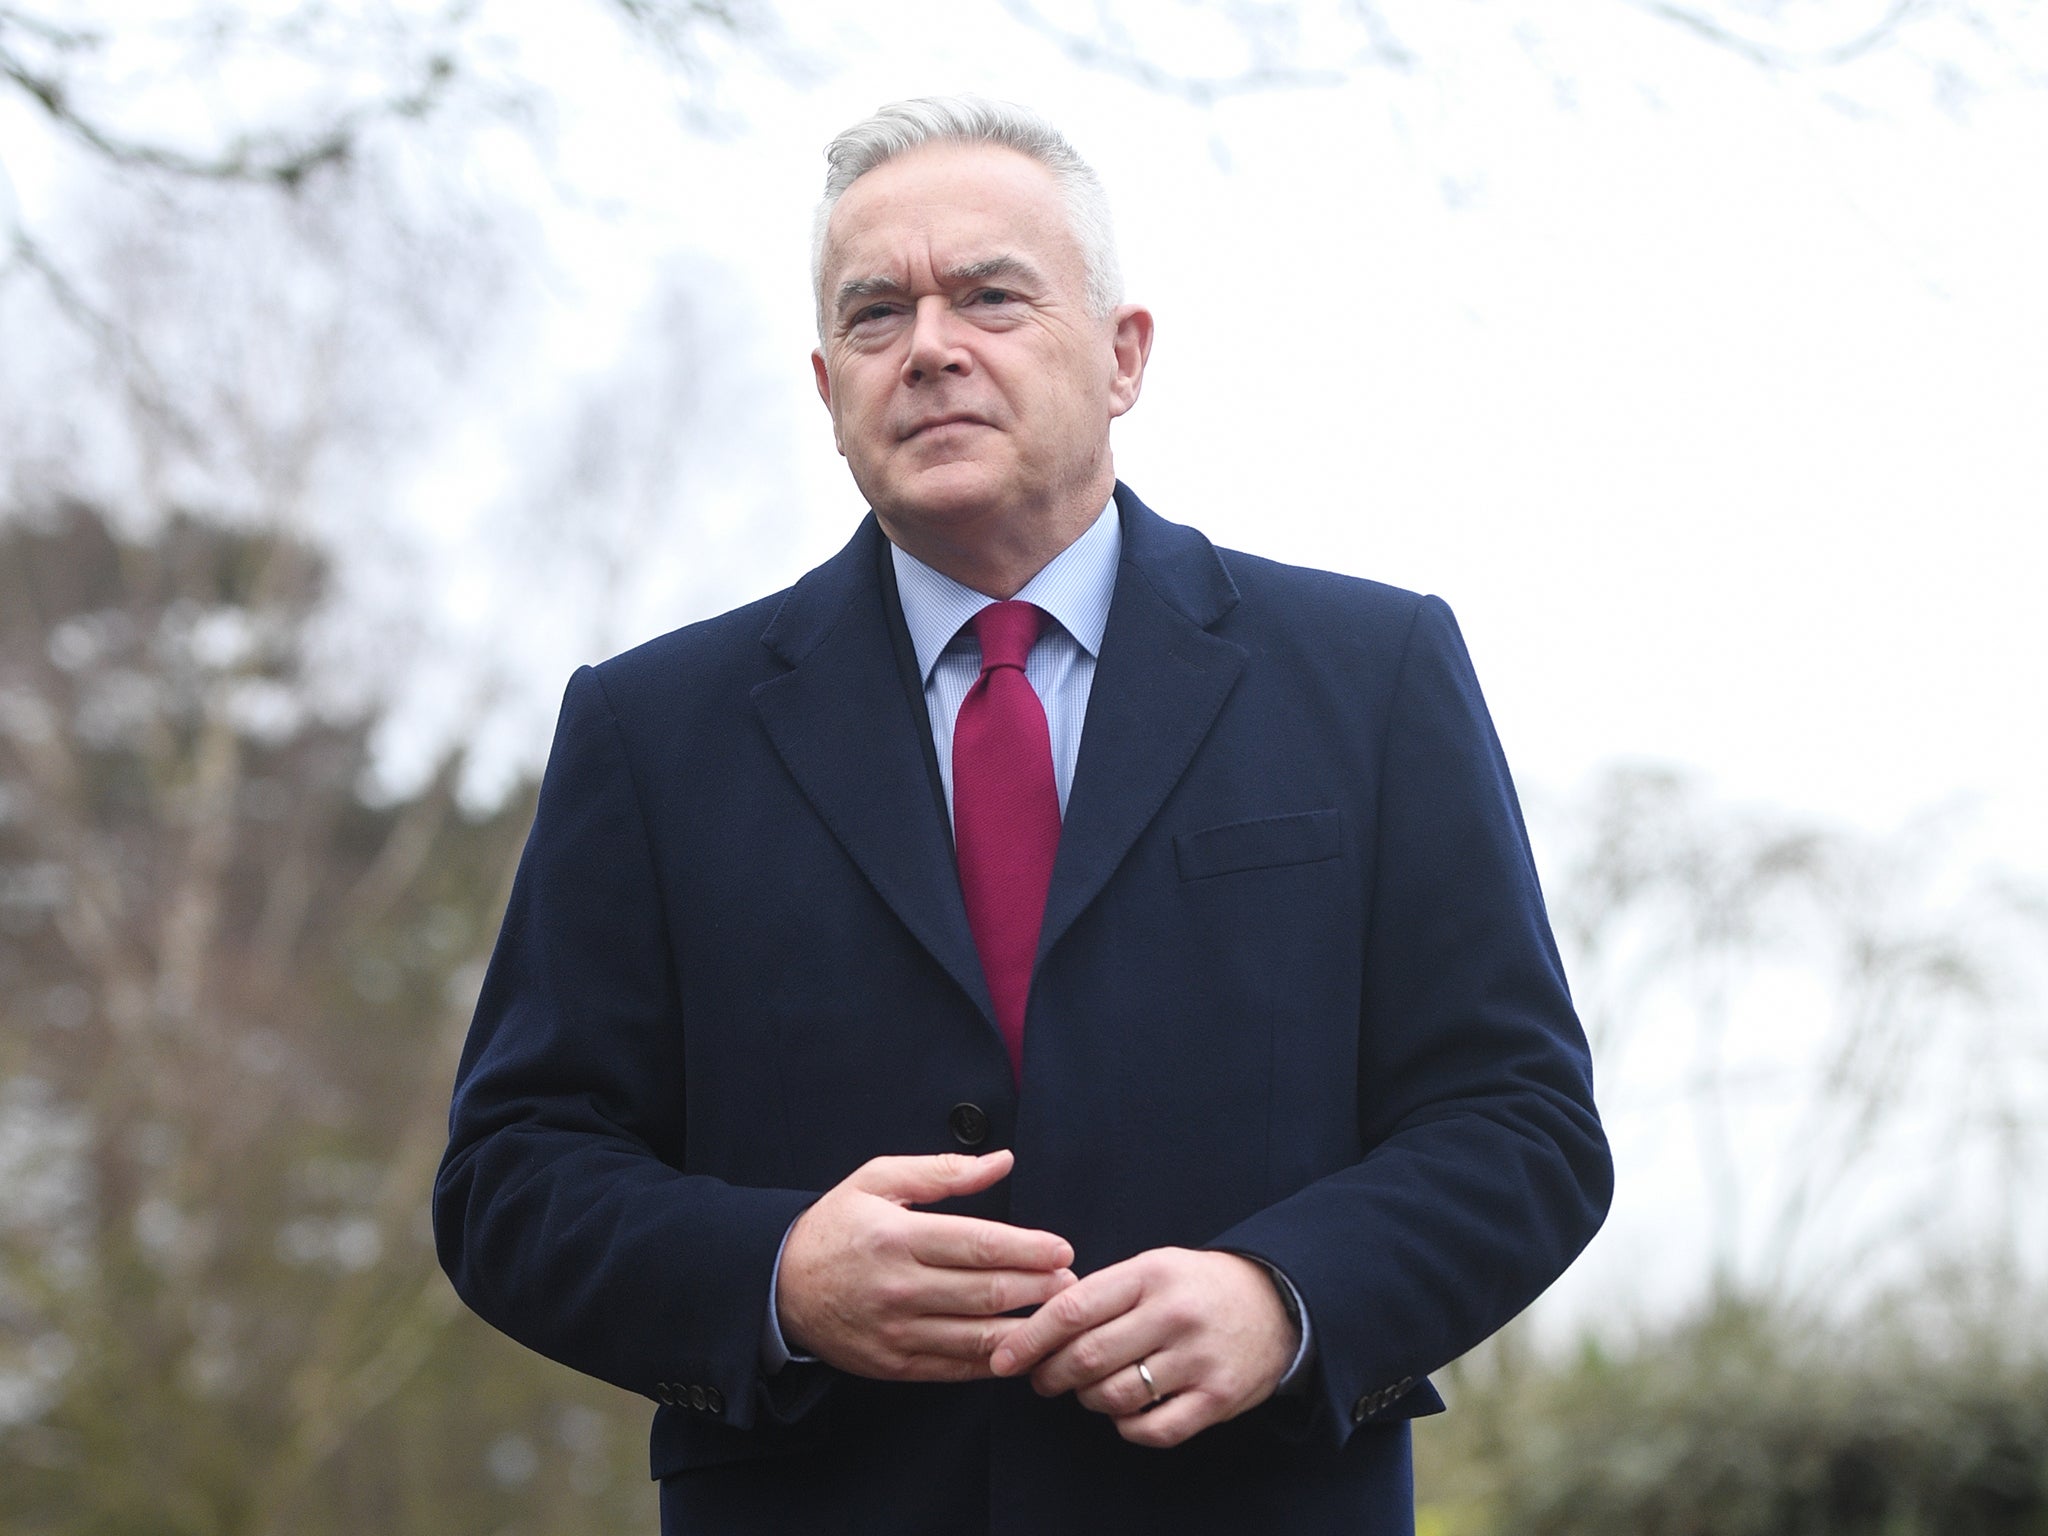 Huw Edwards will address claims when he is ‘well enough’, says his wife